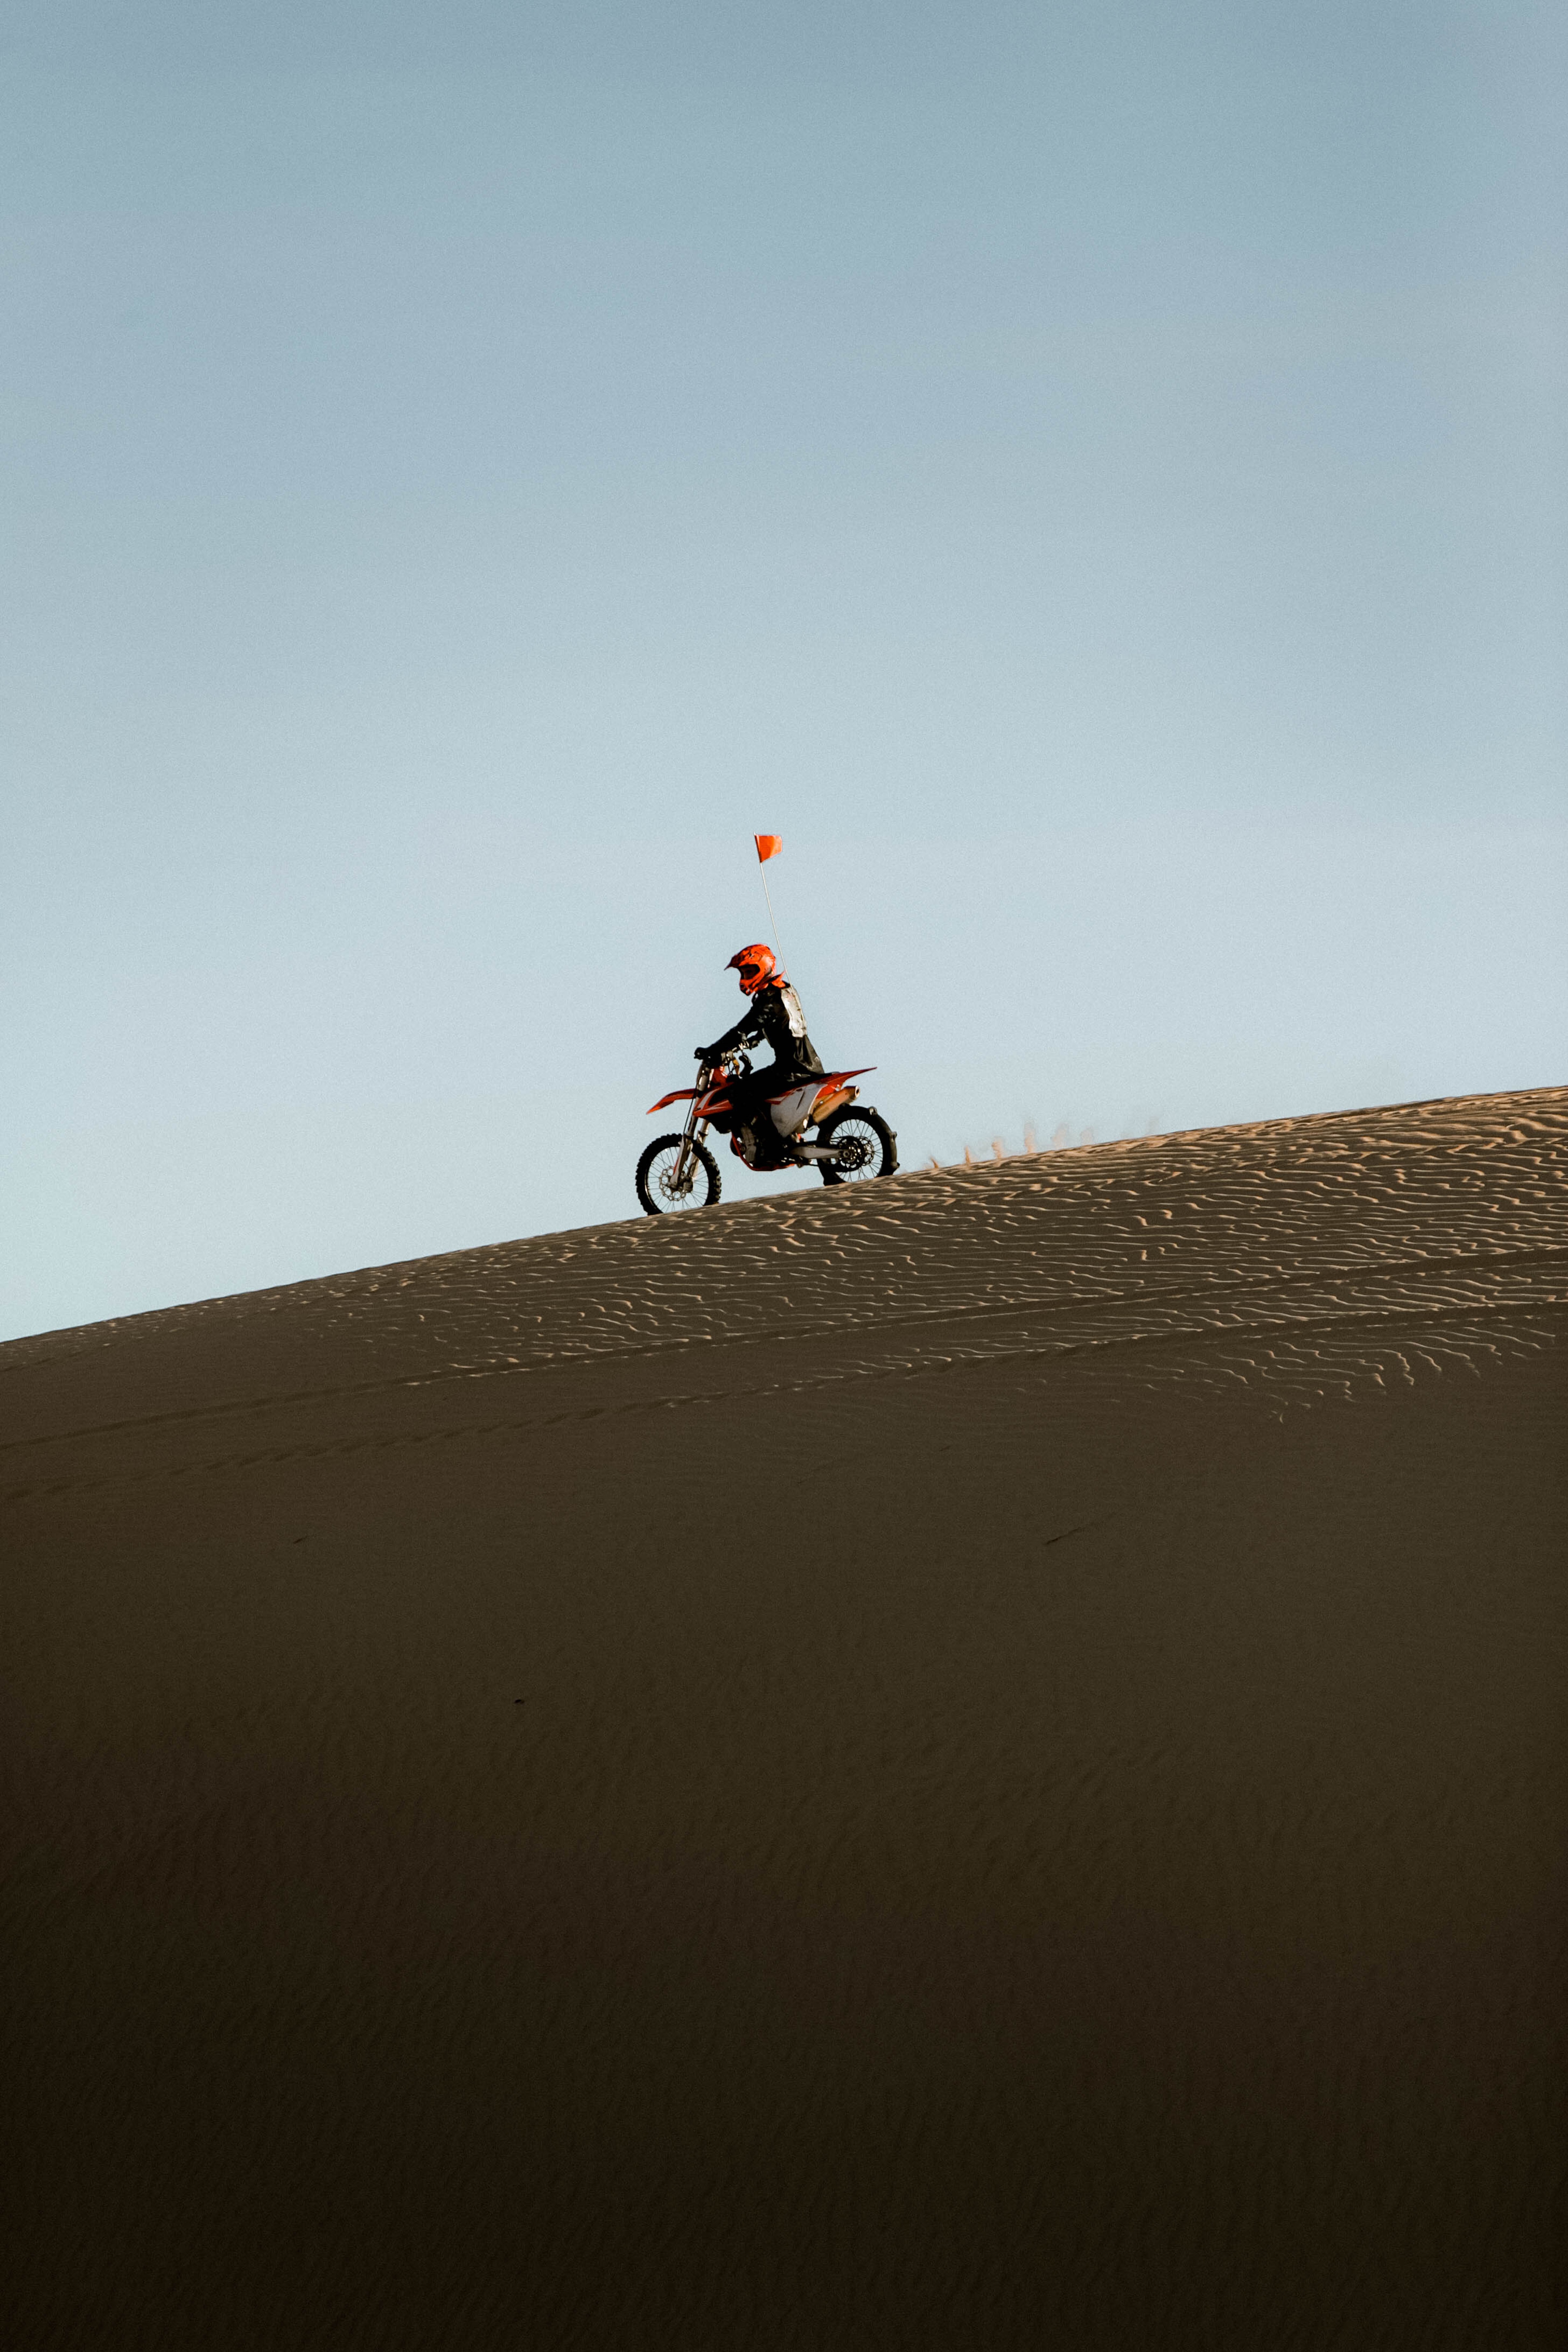 1920x1080 Background sand, motorcycles, desert, rally, motorcyclist, motorcycle